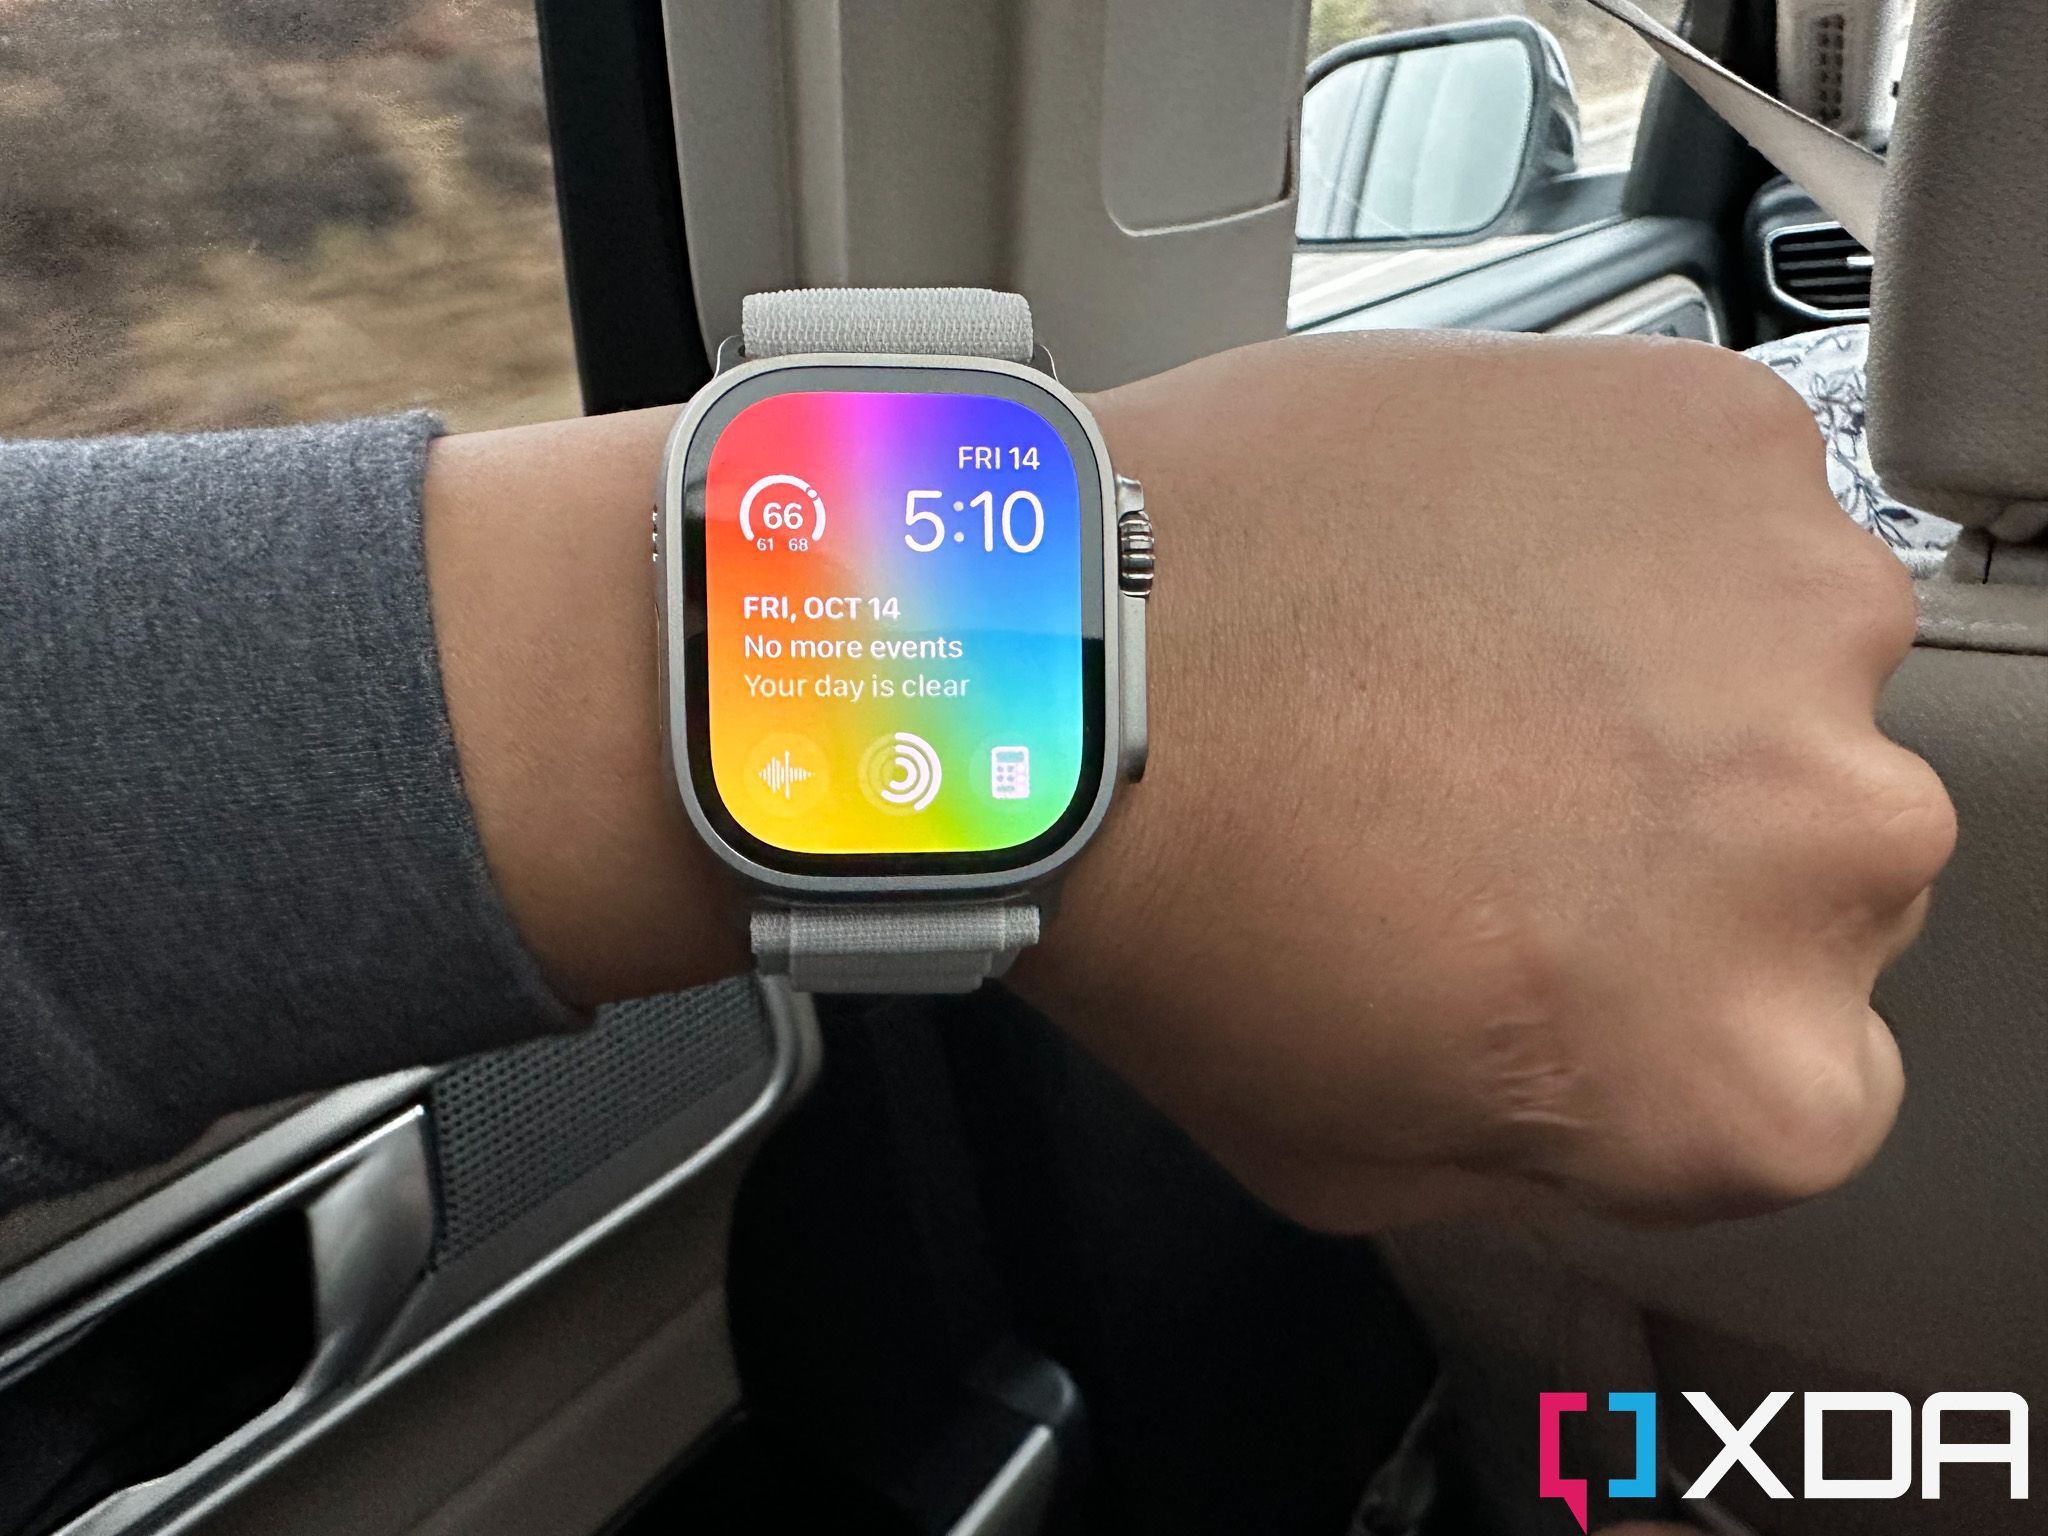 apple-watch-x-with-blood-pressure-monitoring-reportedly-coming-next-year